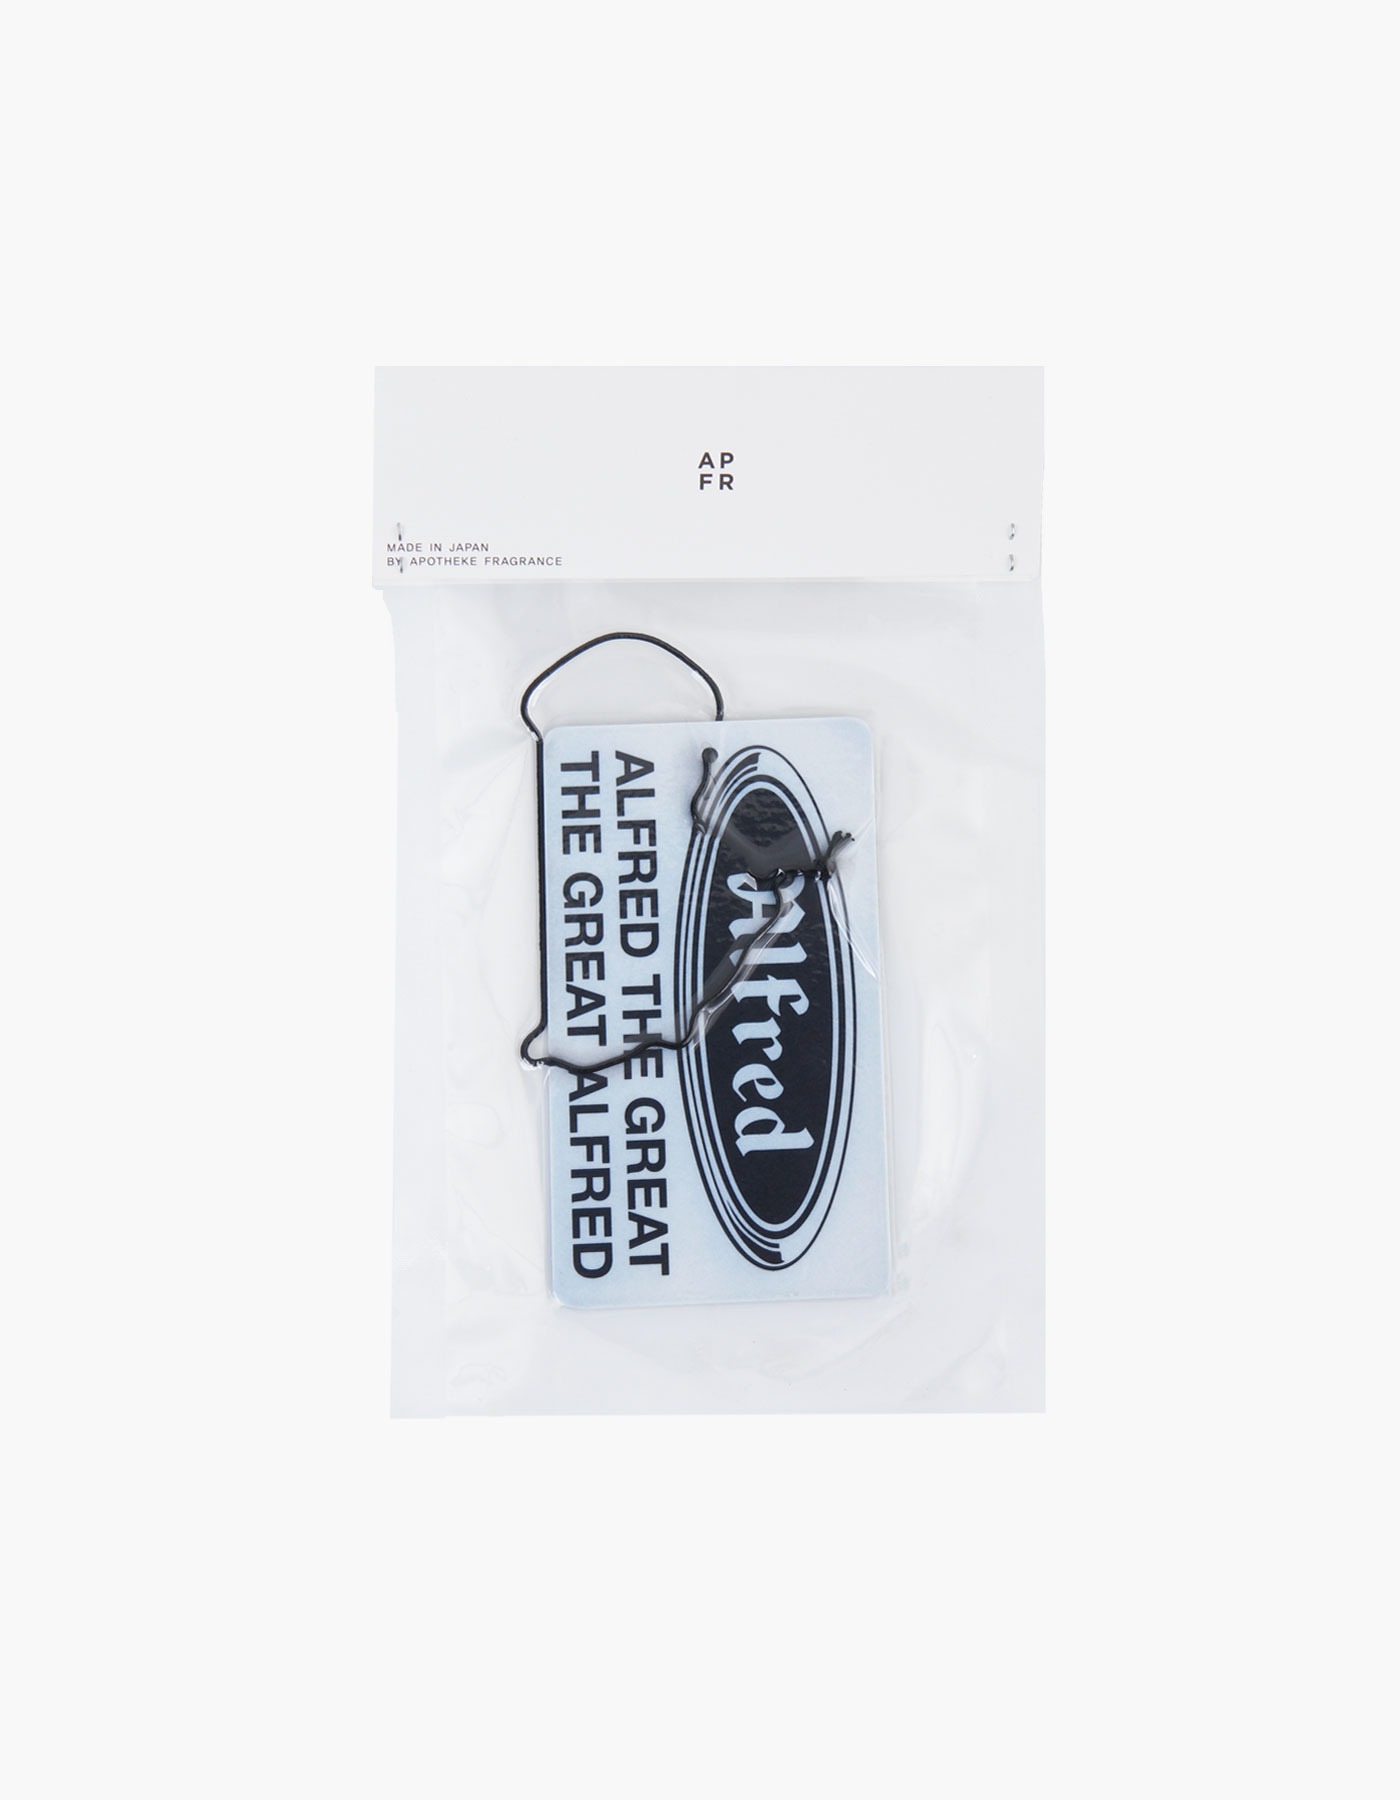 FRED FRAGRANCE PAPER TAG BY APFR